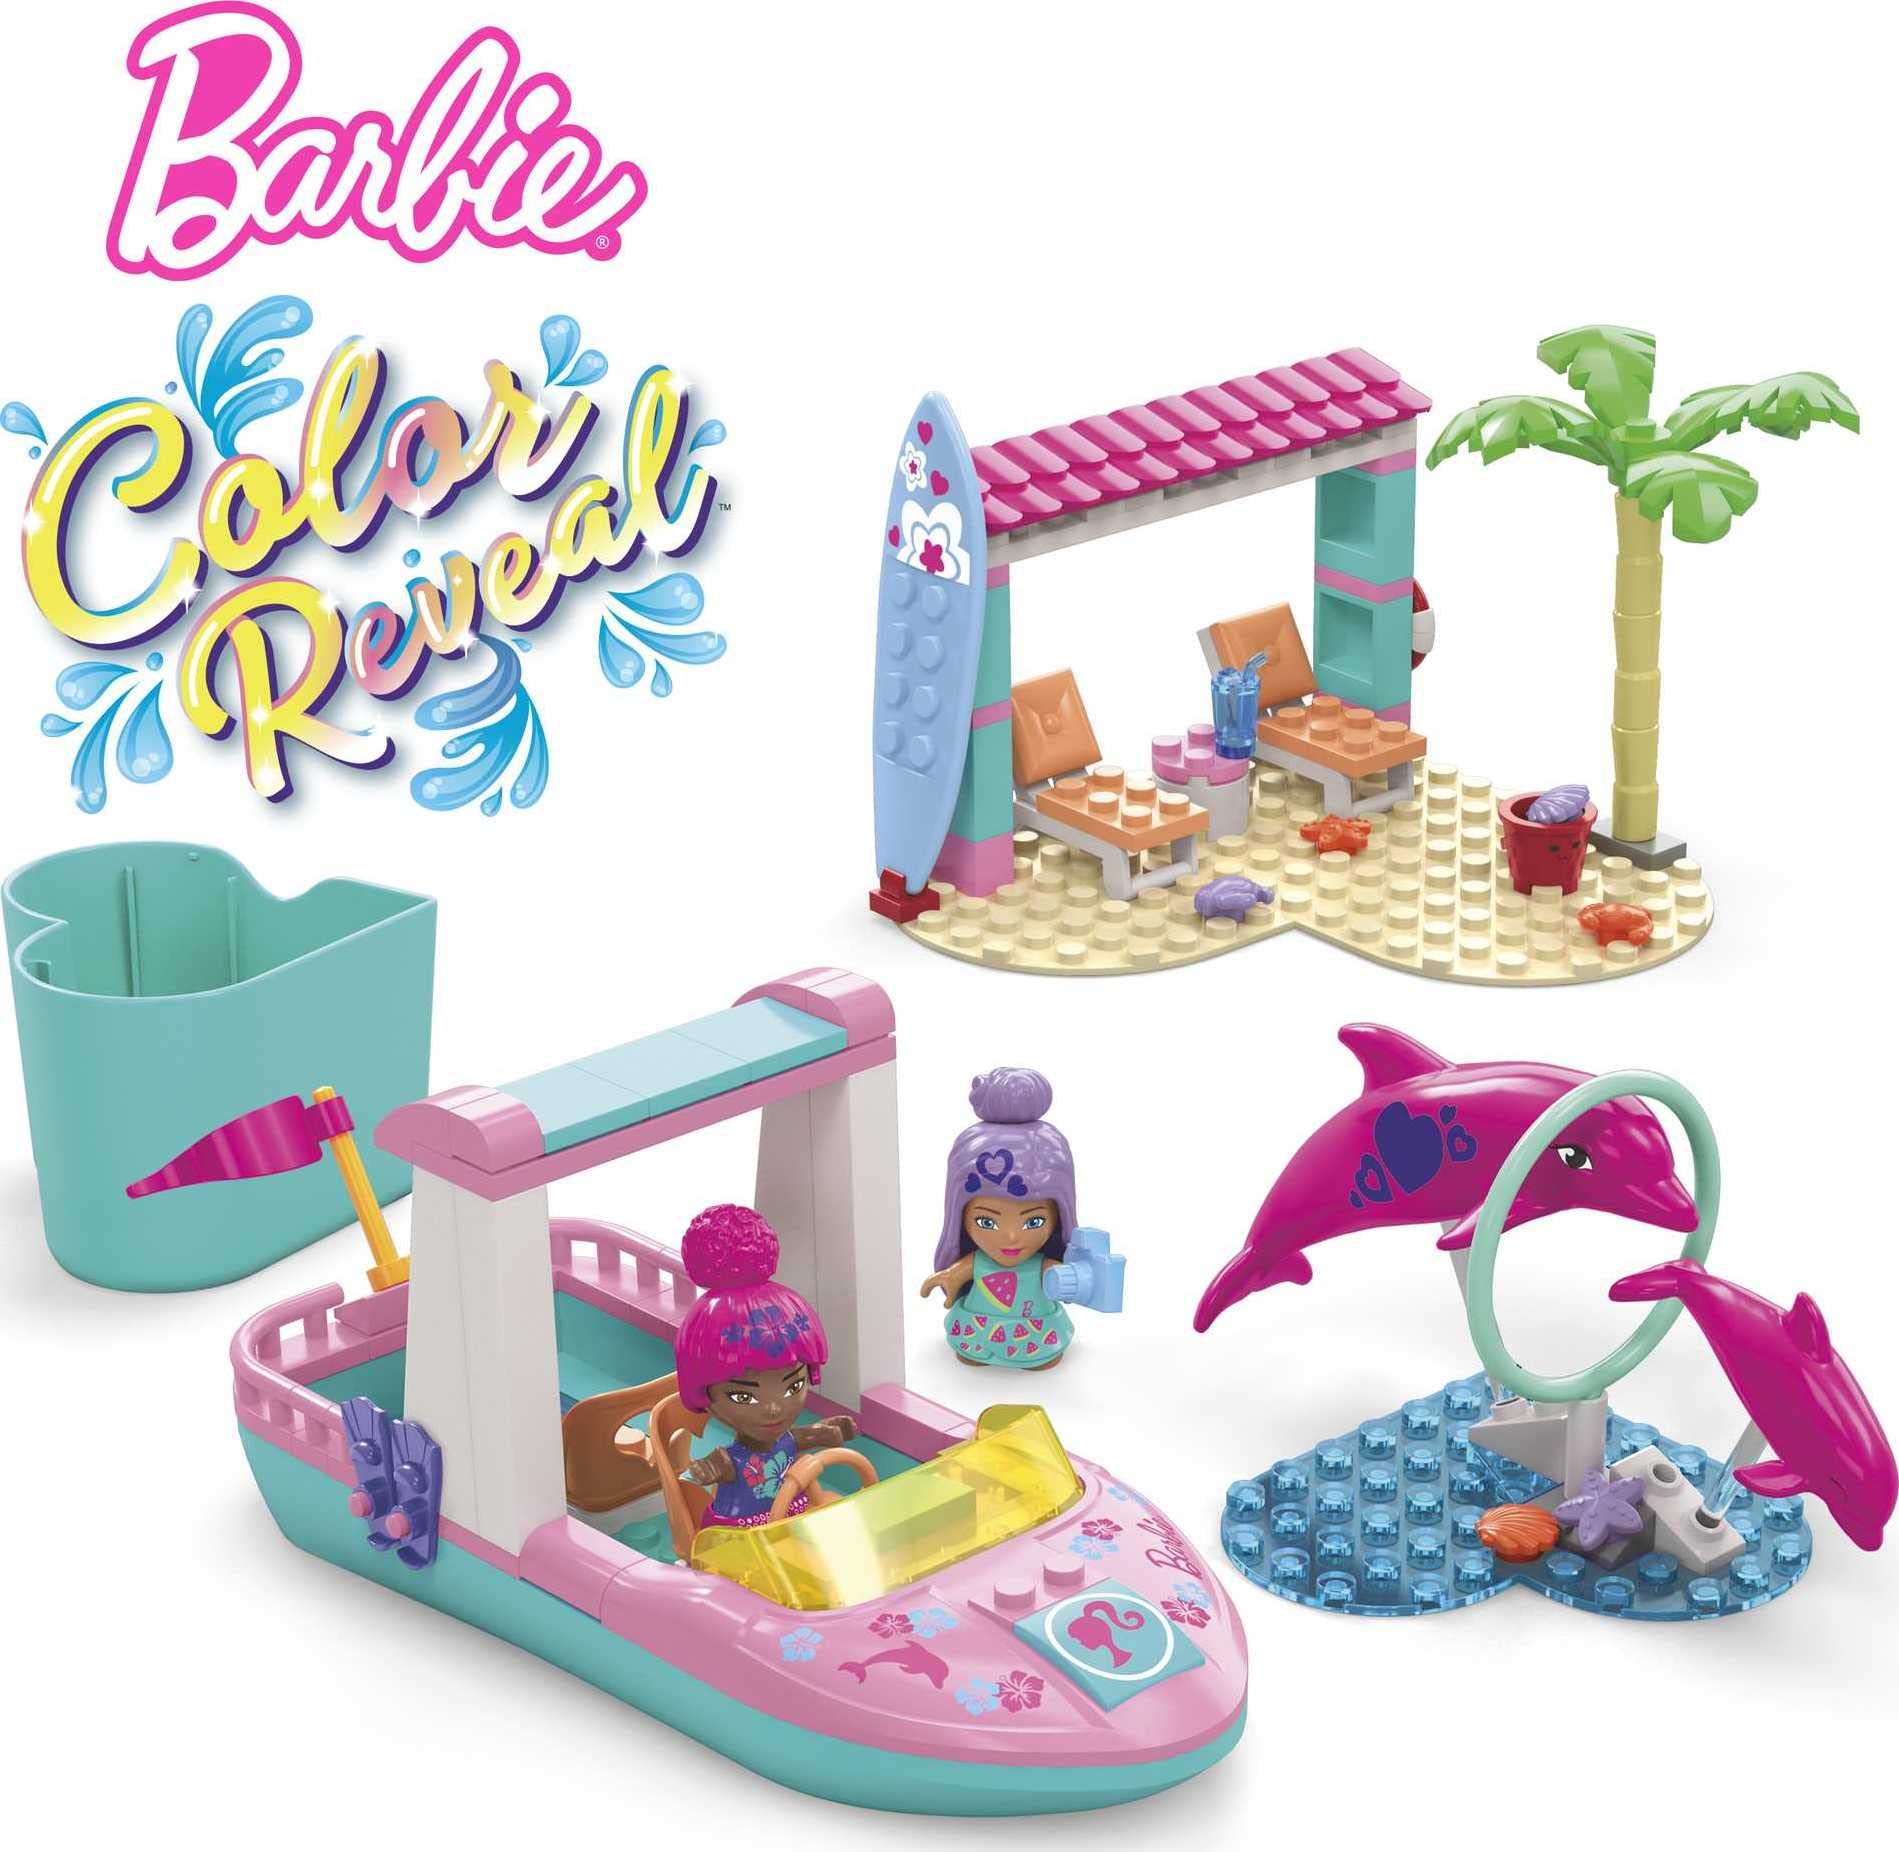 121-Pcs Mega Barbie Color Reveal Building Dolphin Exploration Toy Playset w/ 15 Surprises & Accessories $11.29 + Free Shipping w/ Prime or on $25+